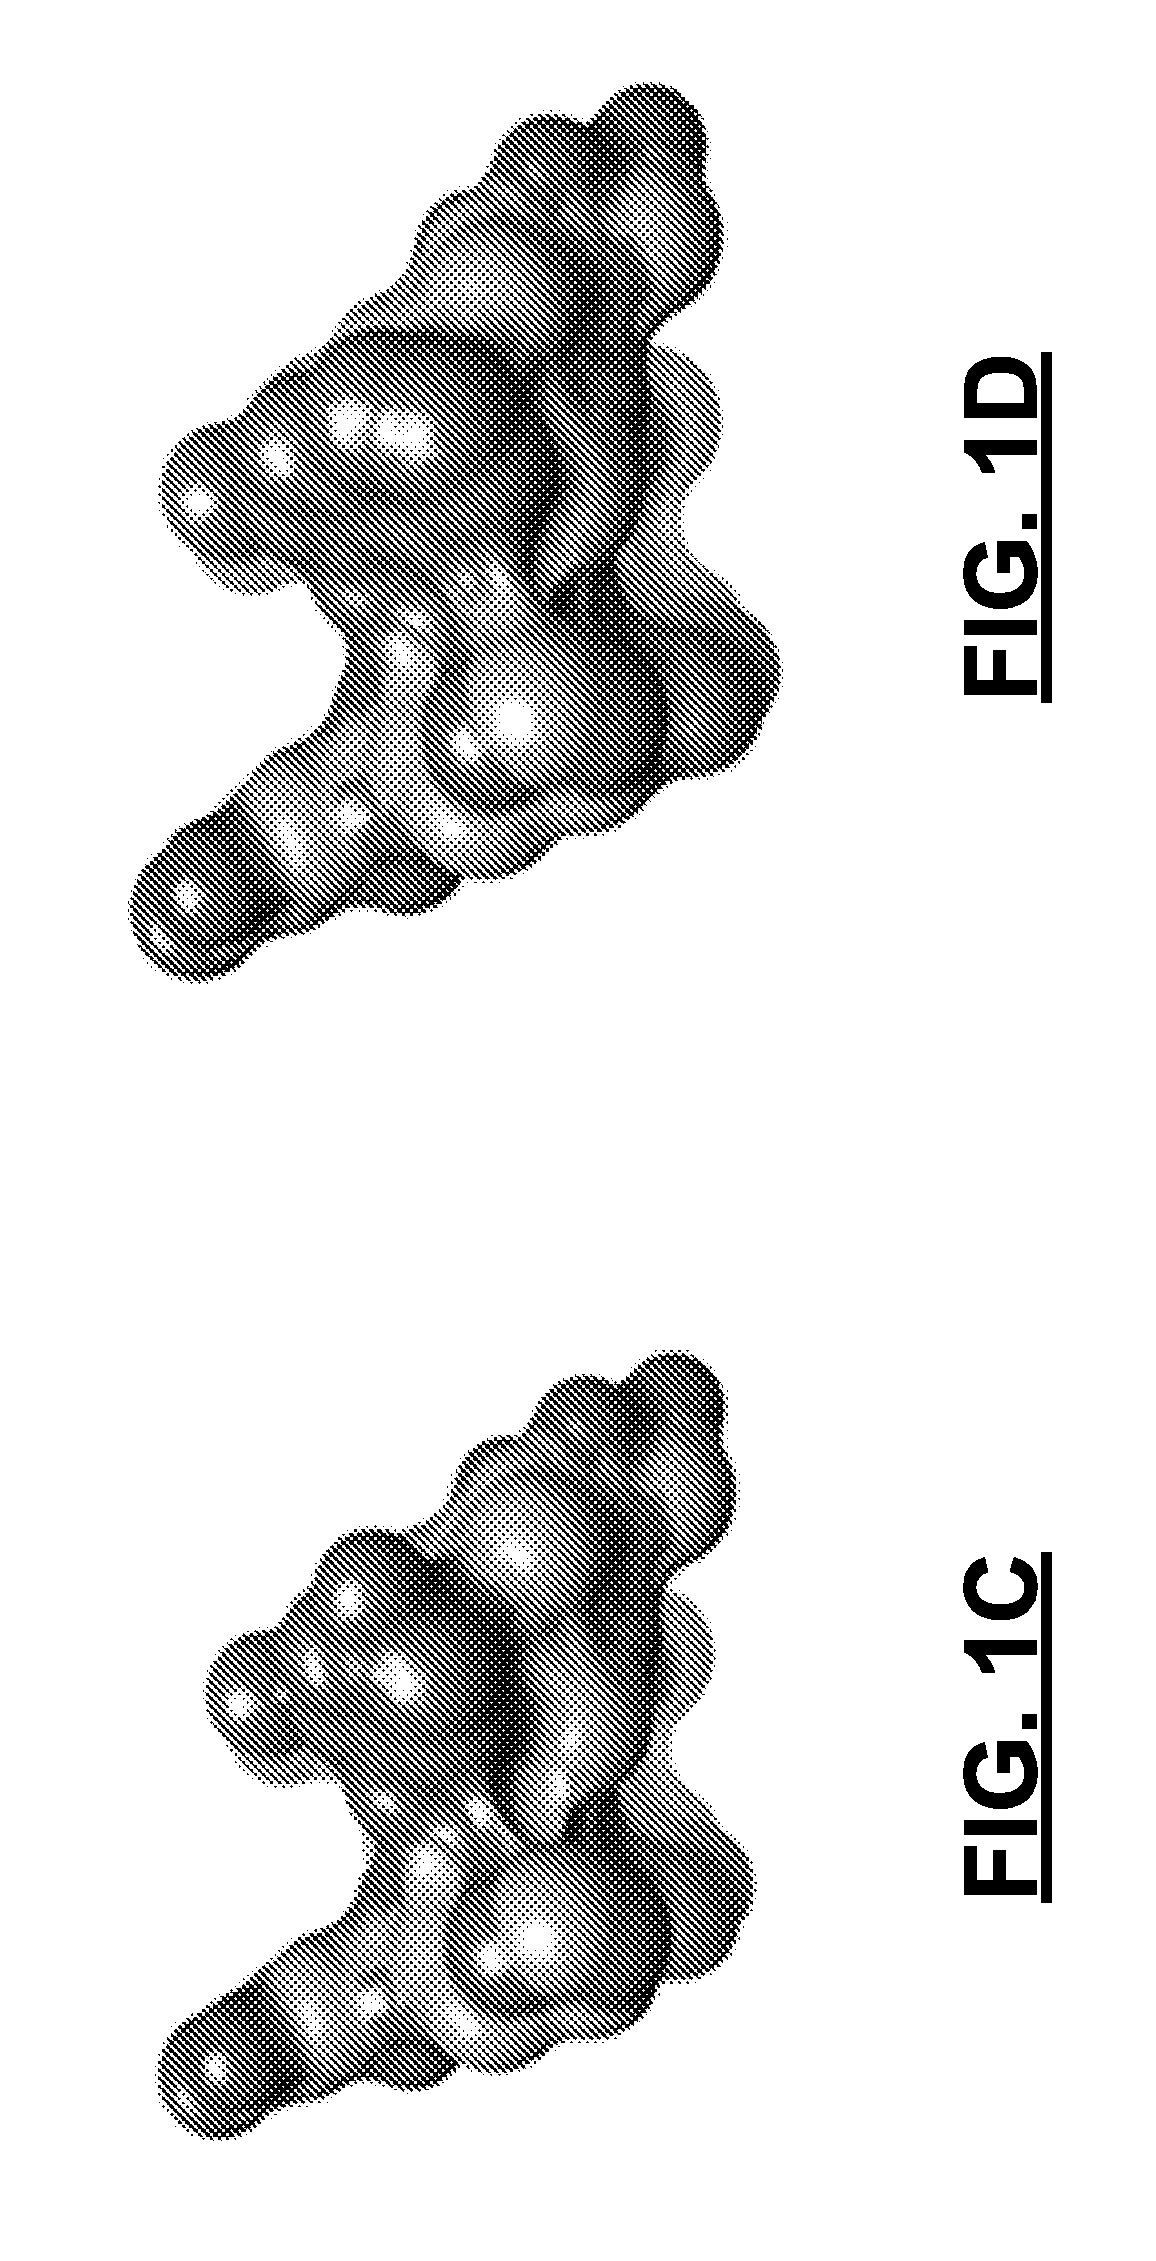 Lytic peptides having Anti-proliferative activity against prostate cancer cells